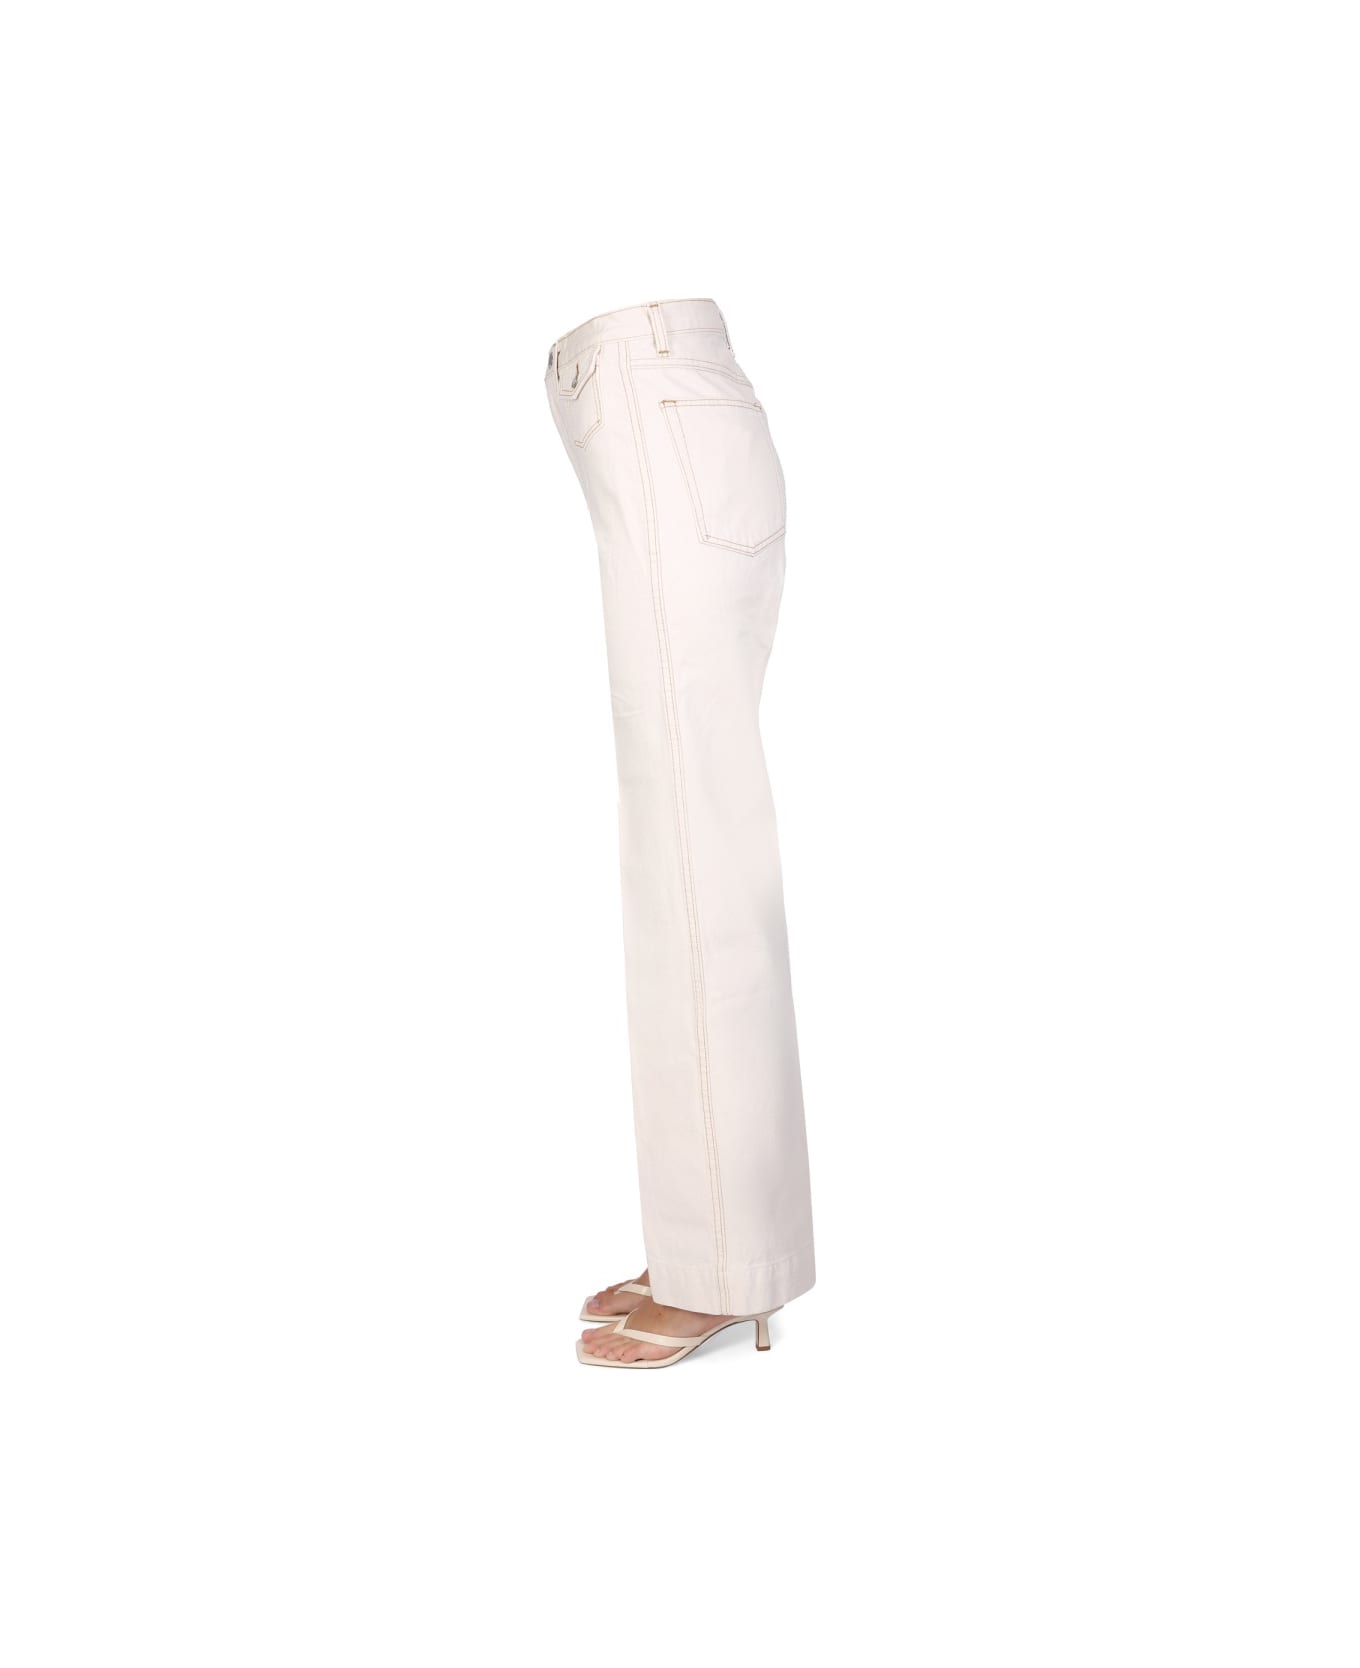 RE/DONE "70's" Wide Leg Jeans - WHITE